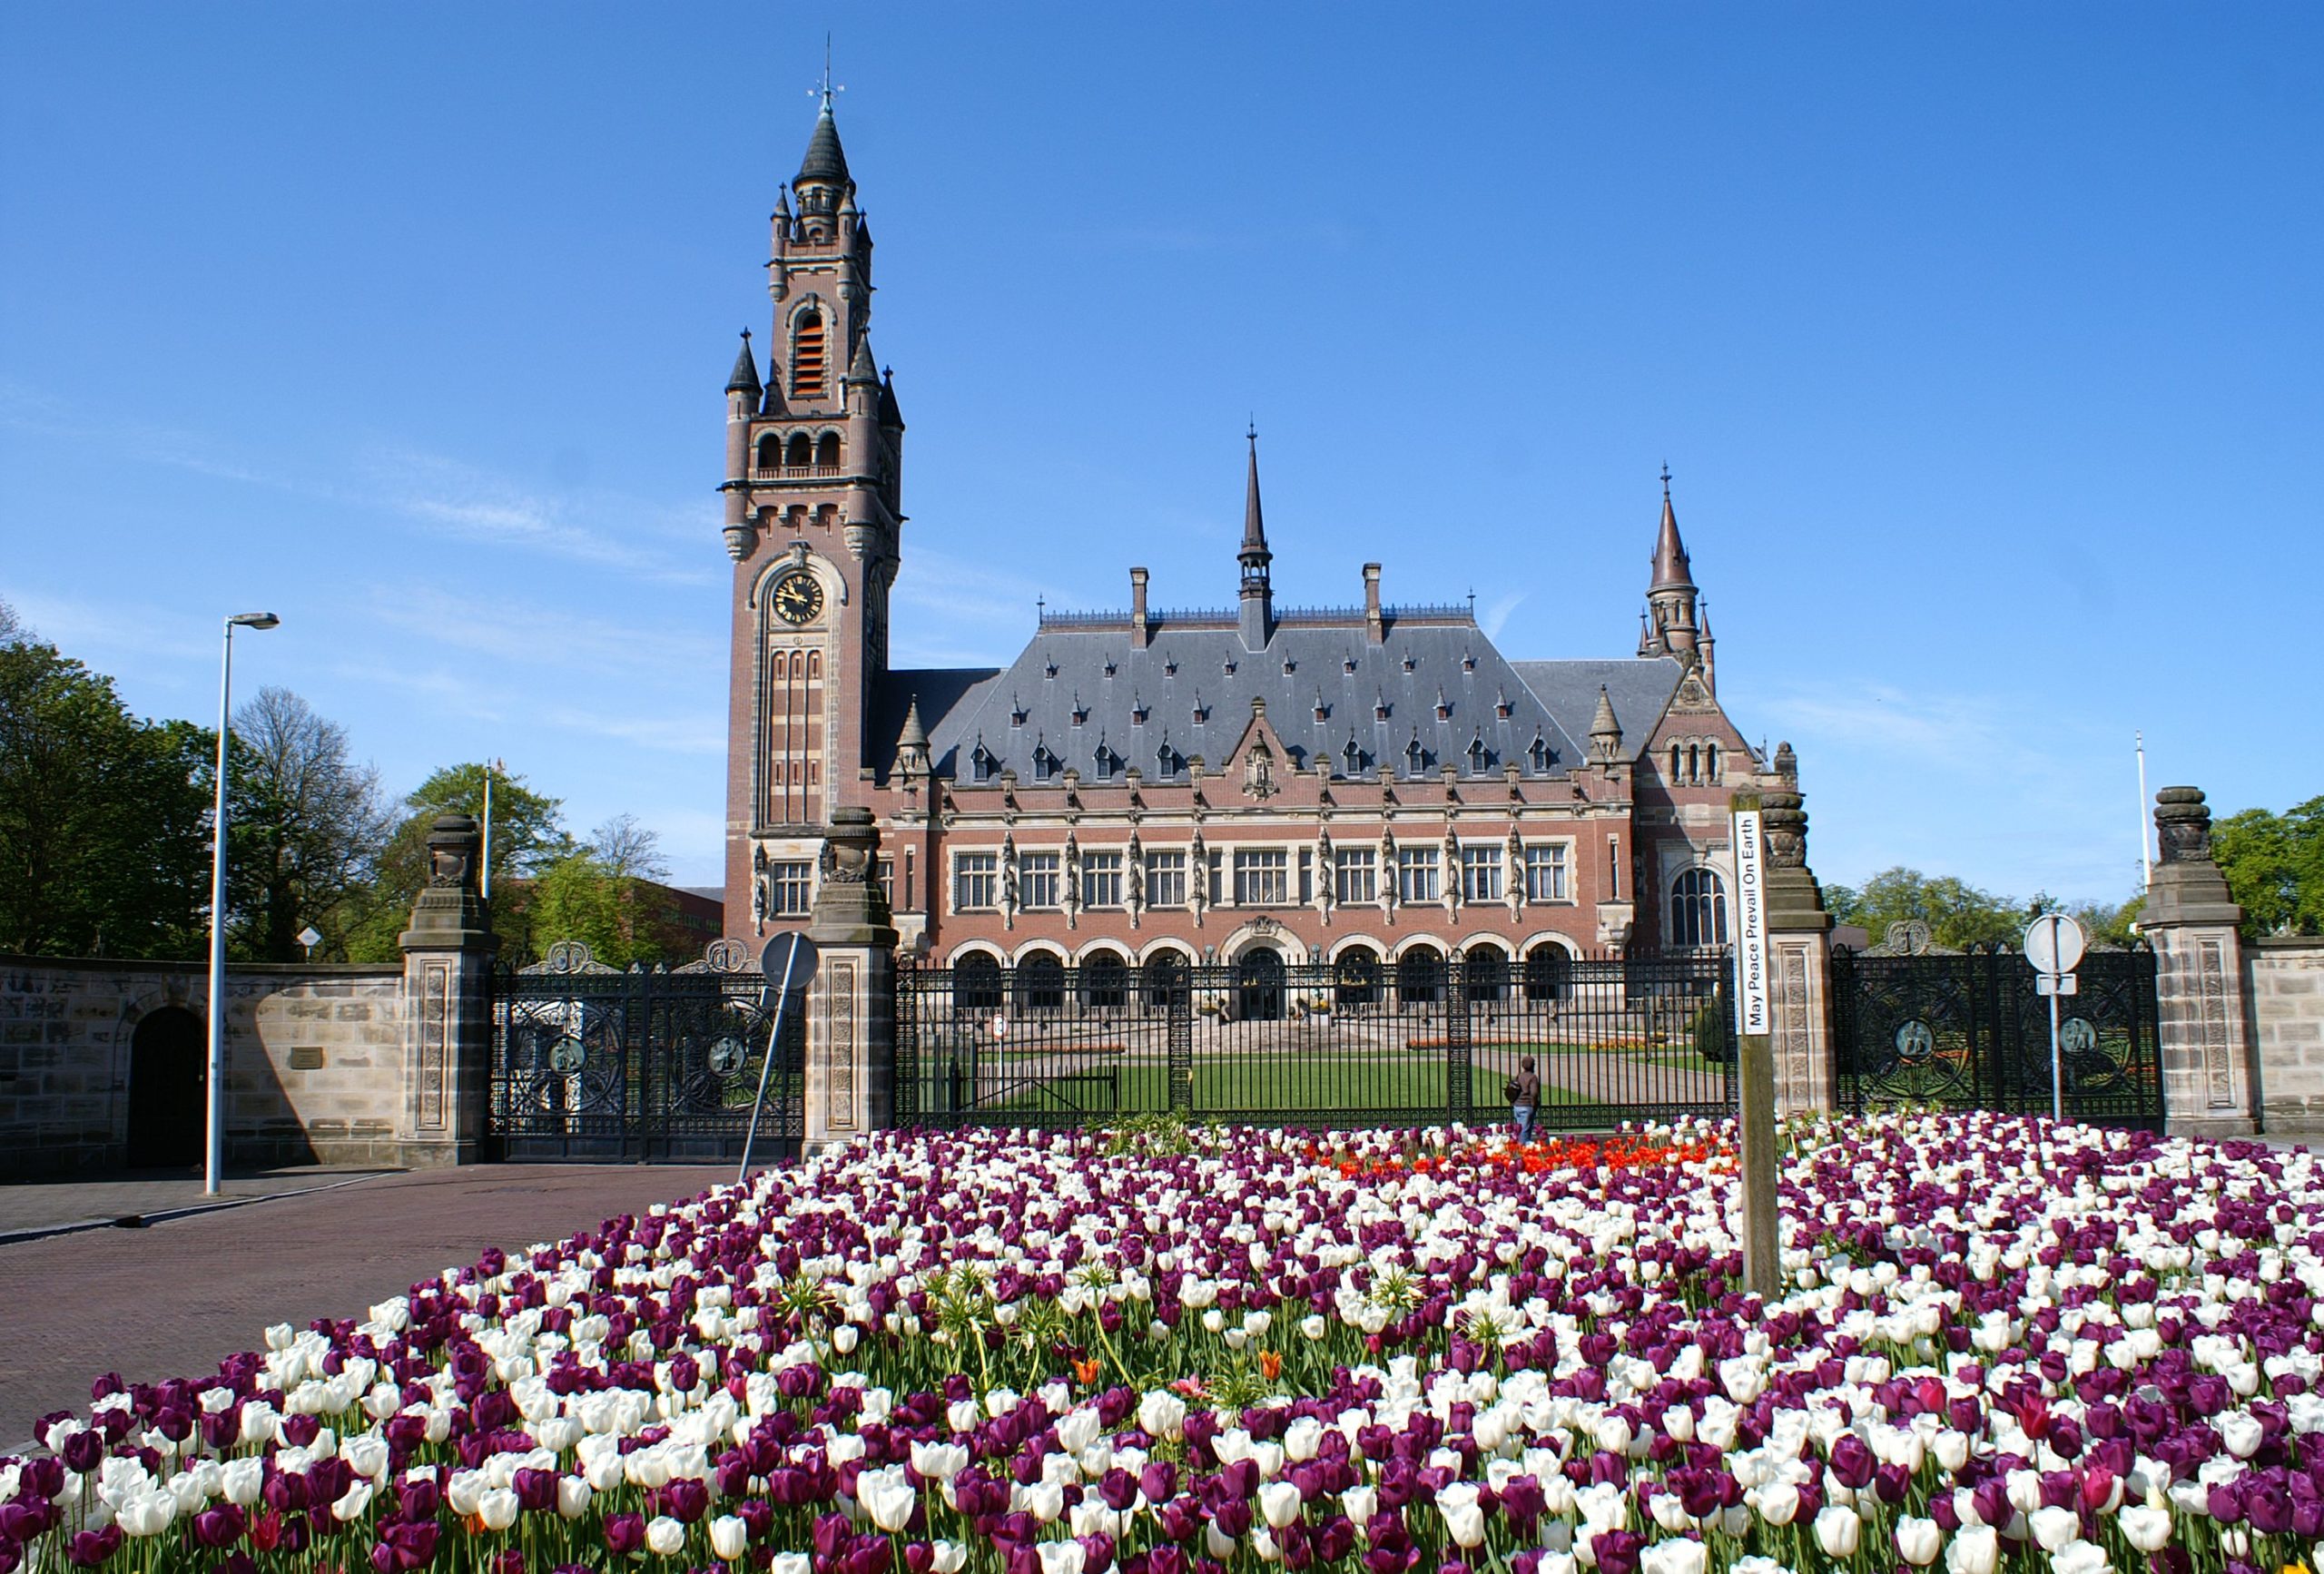 The Hague lives up to slogan ‘International City of Peace and Justice’